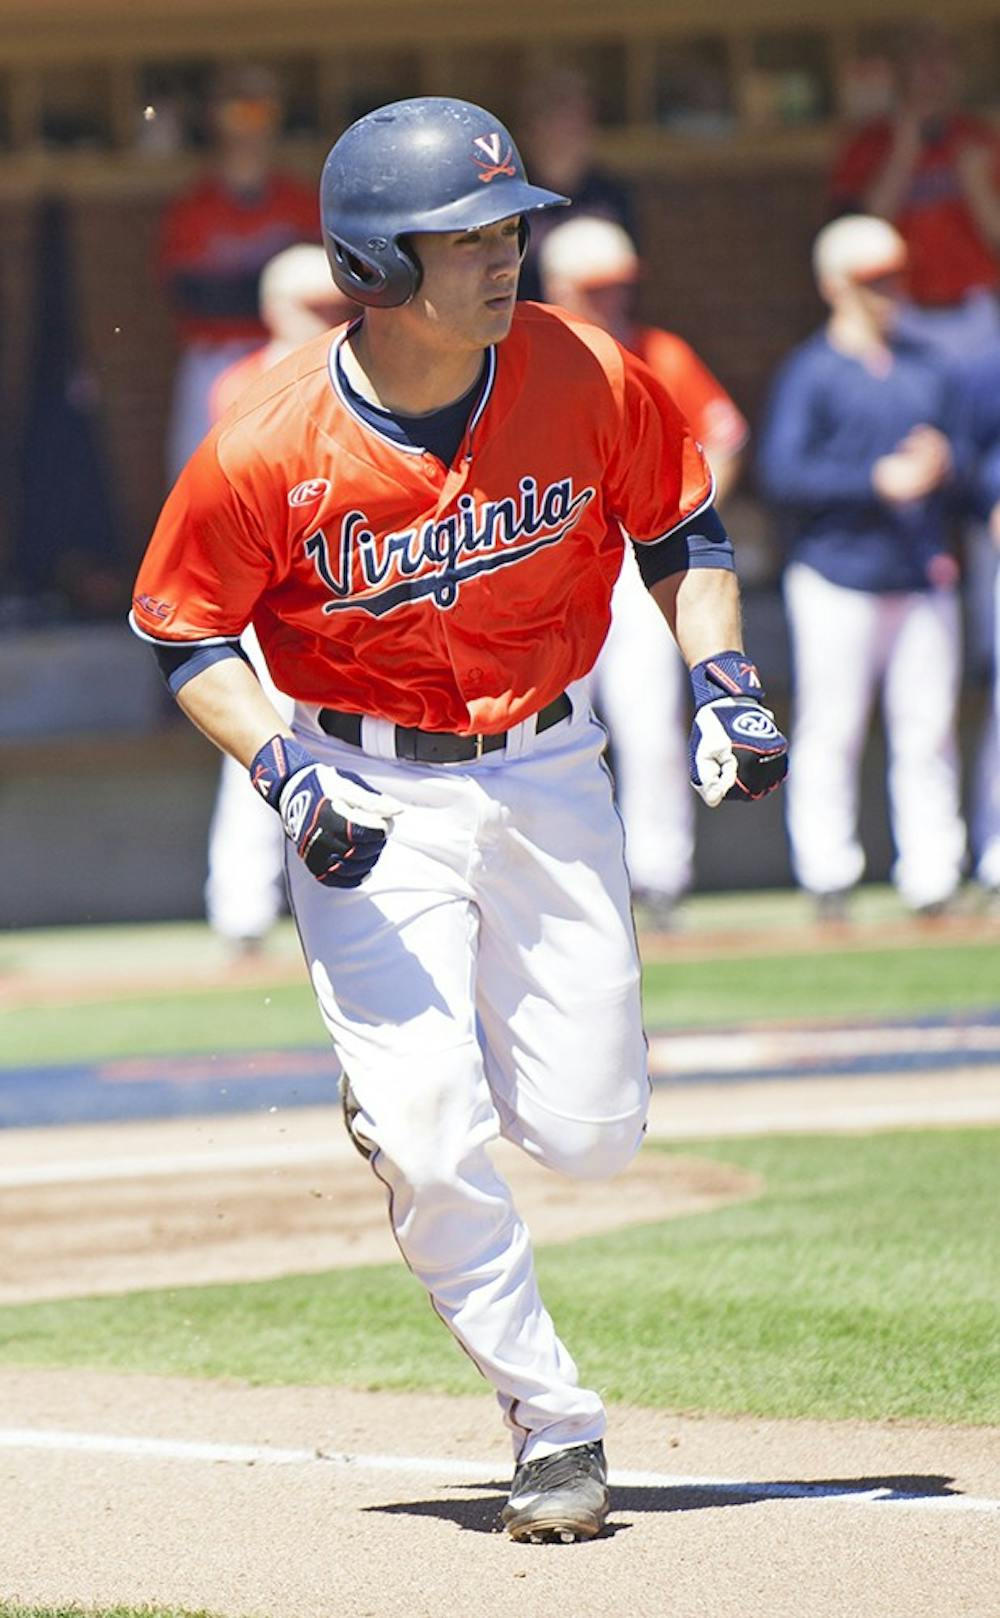 <p>Junior catcher Matt Thaiss, the 16th overall pick in the 2016 MLB Draft, signed with the Angels earlier this month. His final season at Virginia ended too soon and in heartbreaking fashion, but Thaiss will be remembered as a  champion.&nbsp;</p>